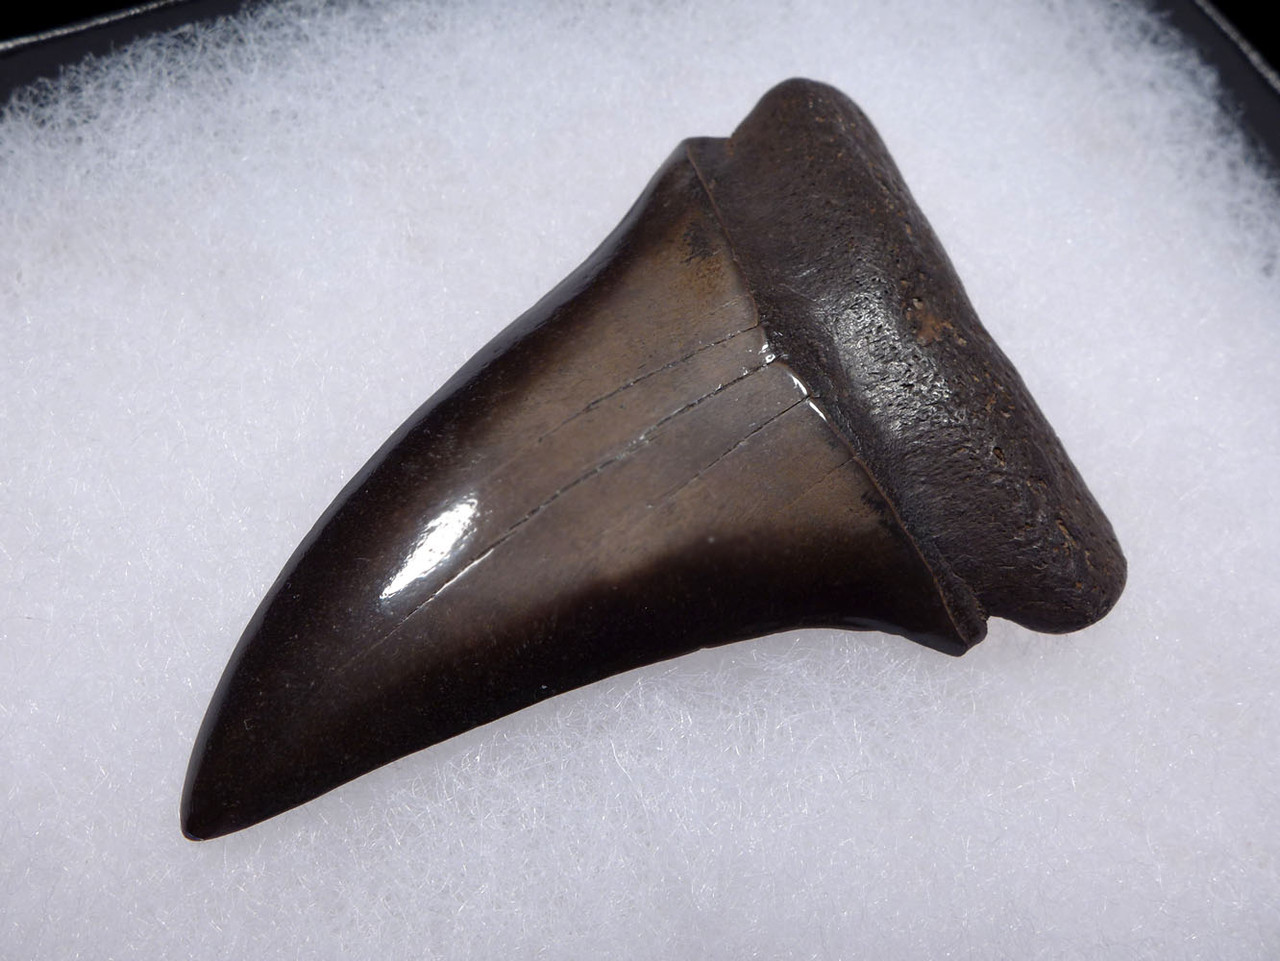 LARGE COLLECTOR GRADE 2.35 INCH GEORGIA FOSSIL SHARK TOOTH OF ISURUS HASTALIS BROAD TOOTH MAKO WITH CHATOYANT PLATINUM ENAMEL  *SHX143